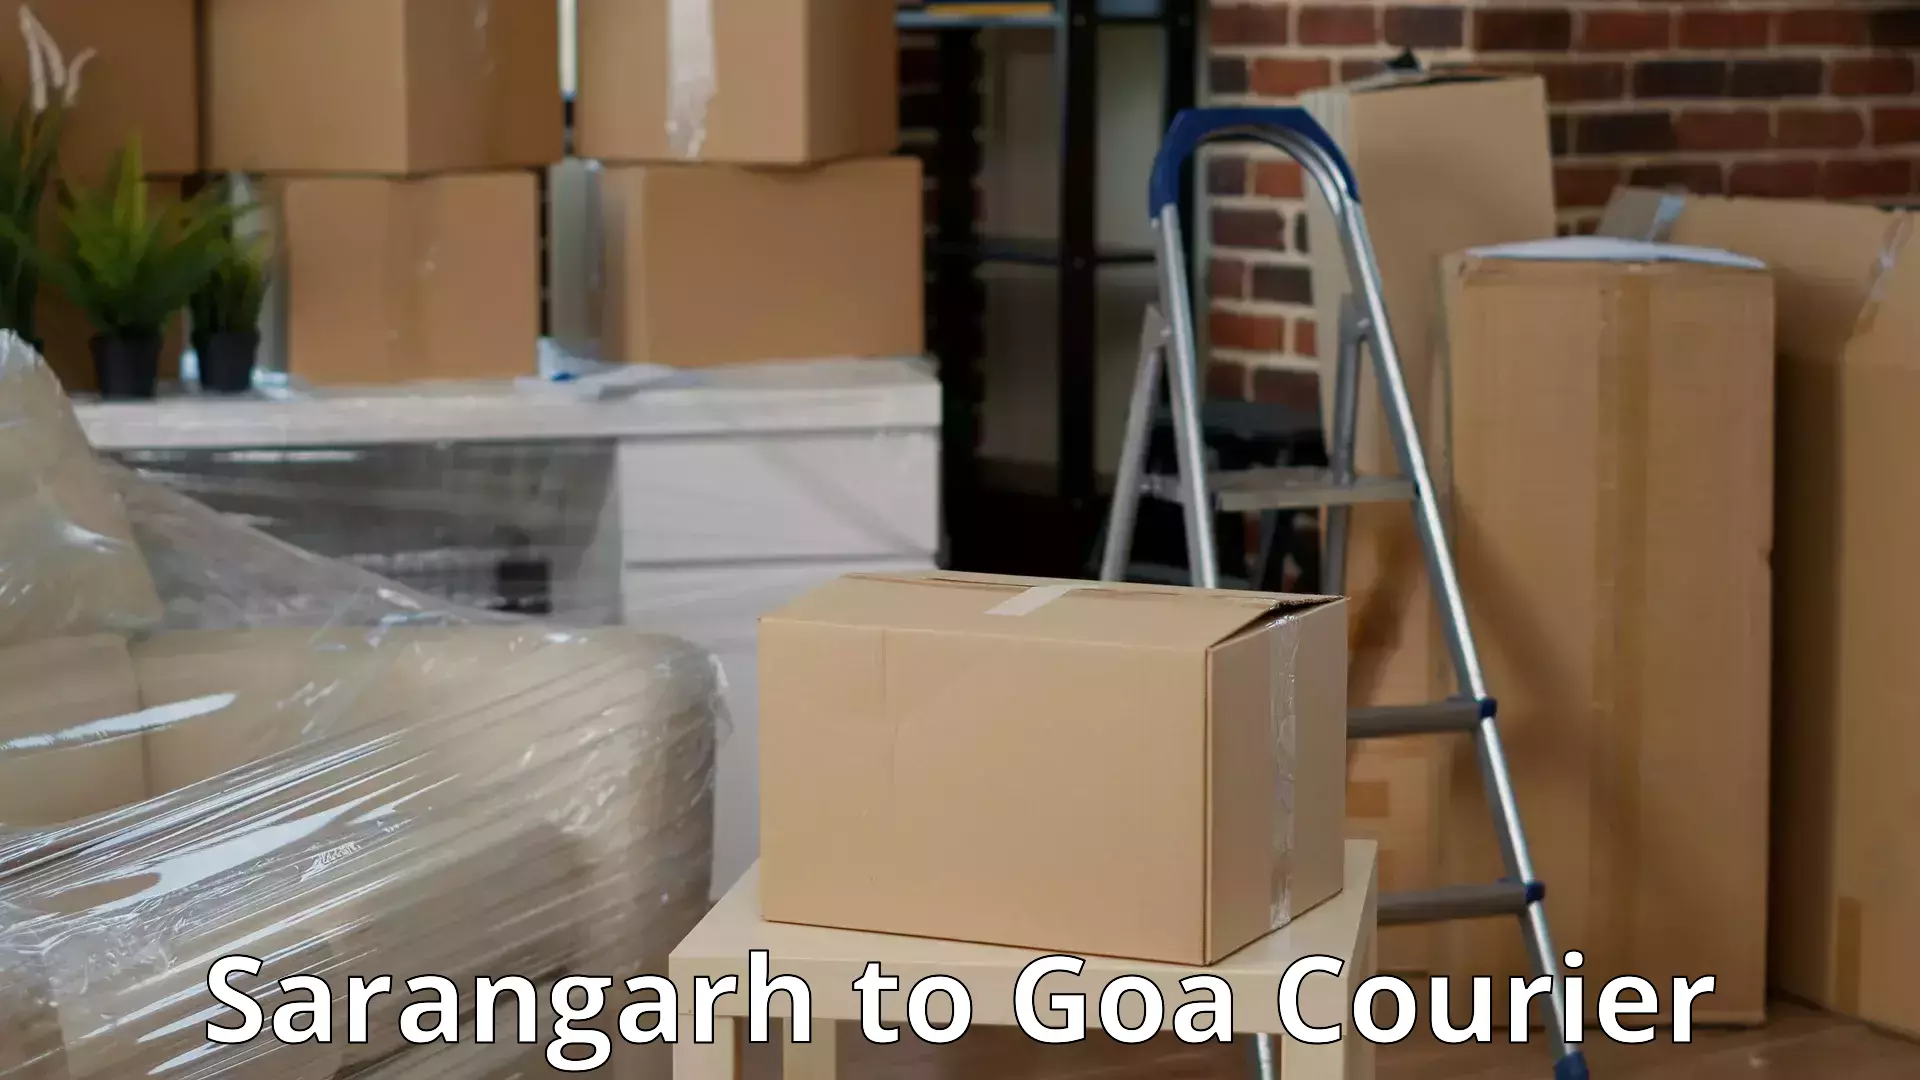 Trusted relocation experts Sarangarh to Goa